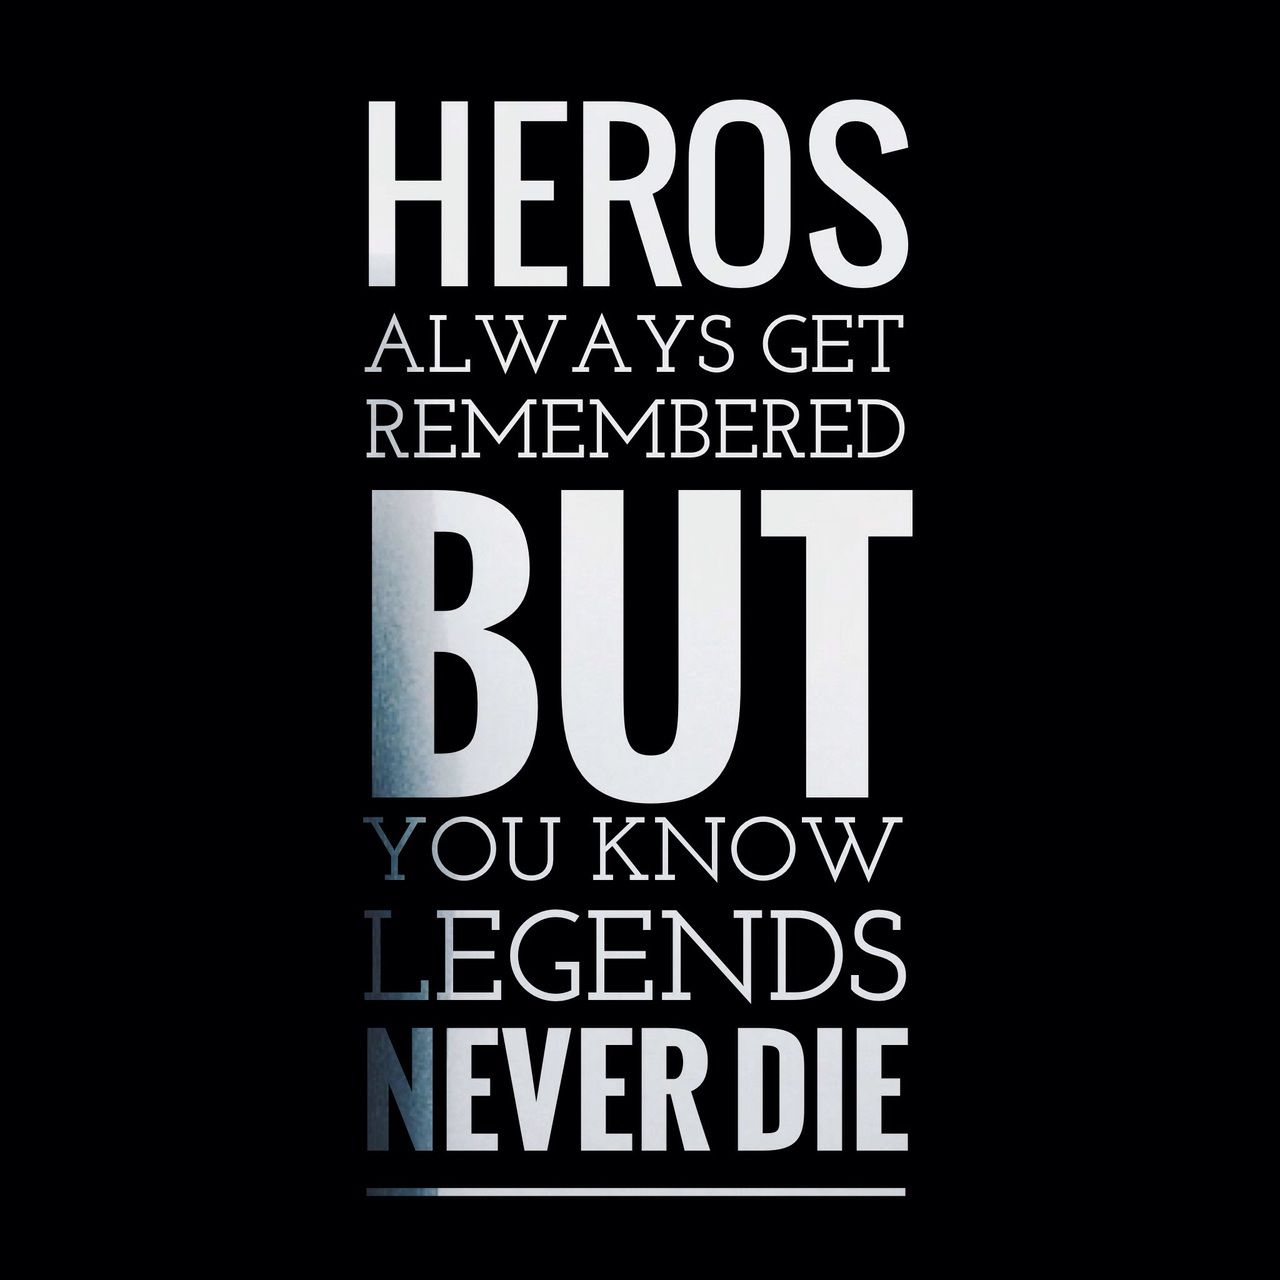 heros always get remembered but you know legends never die